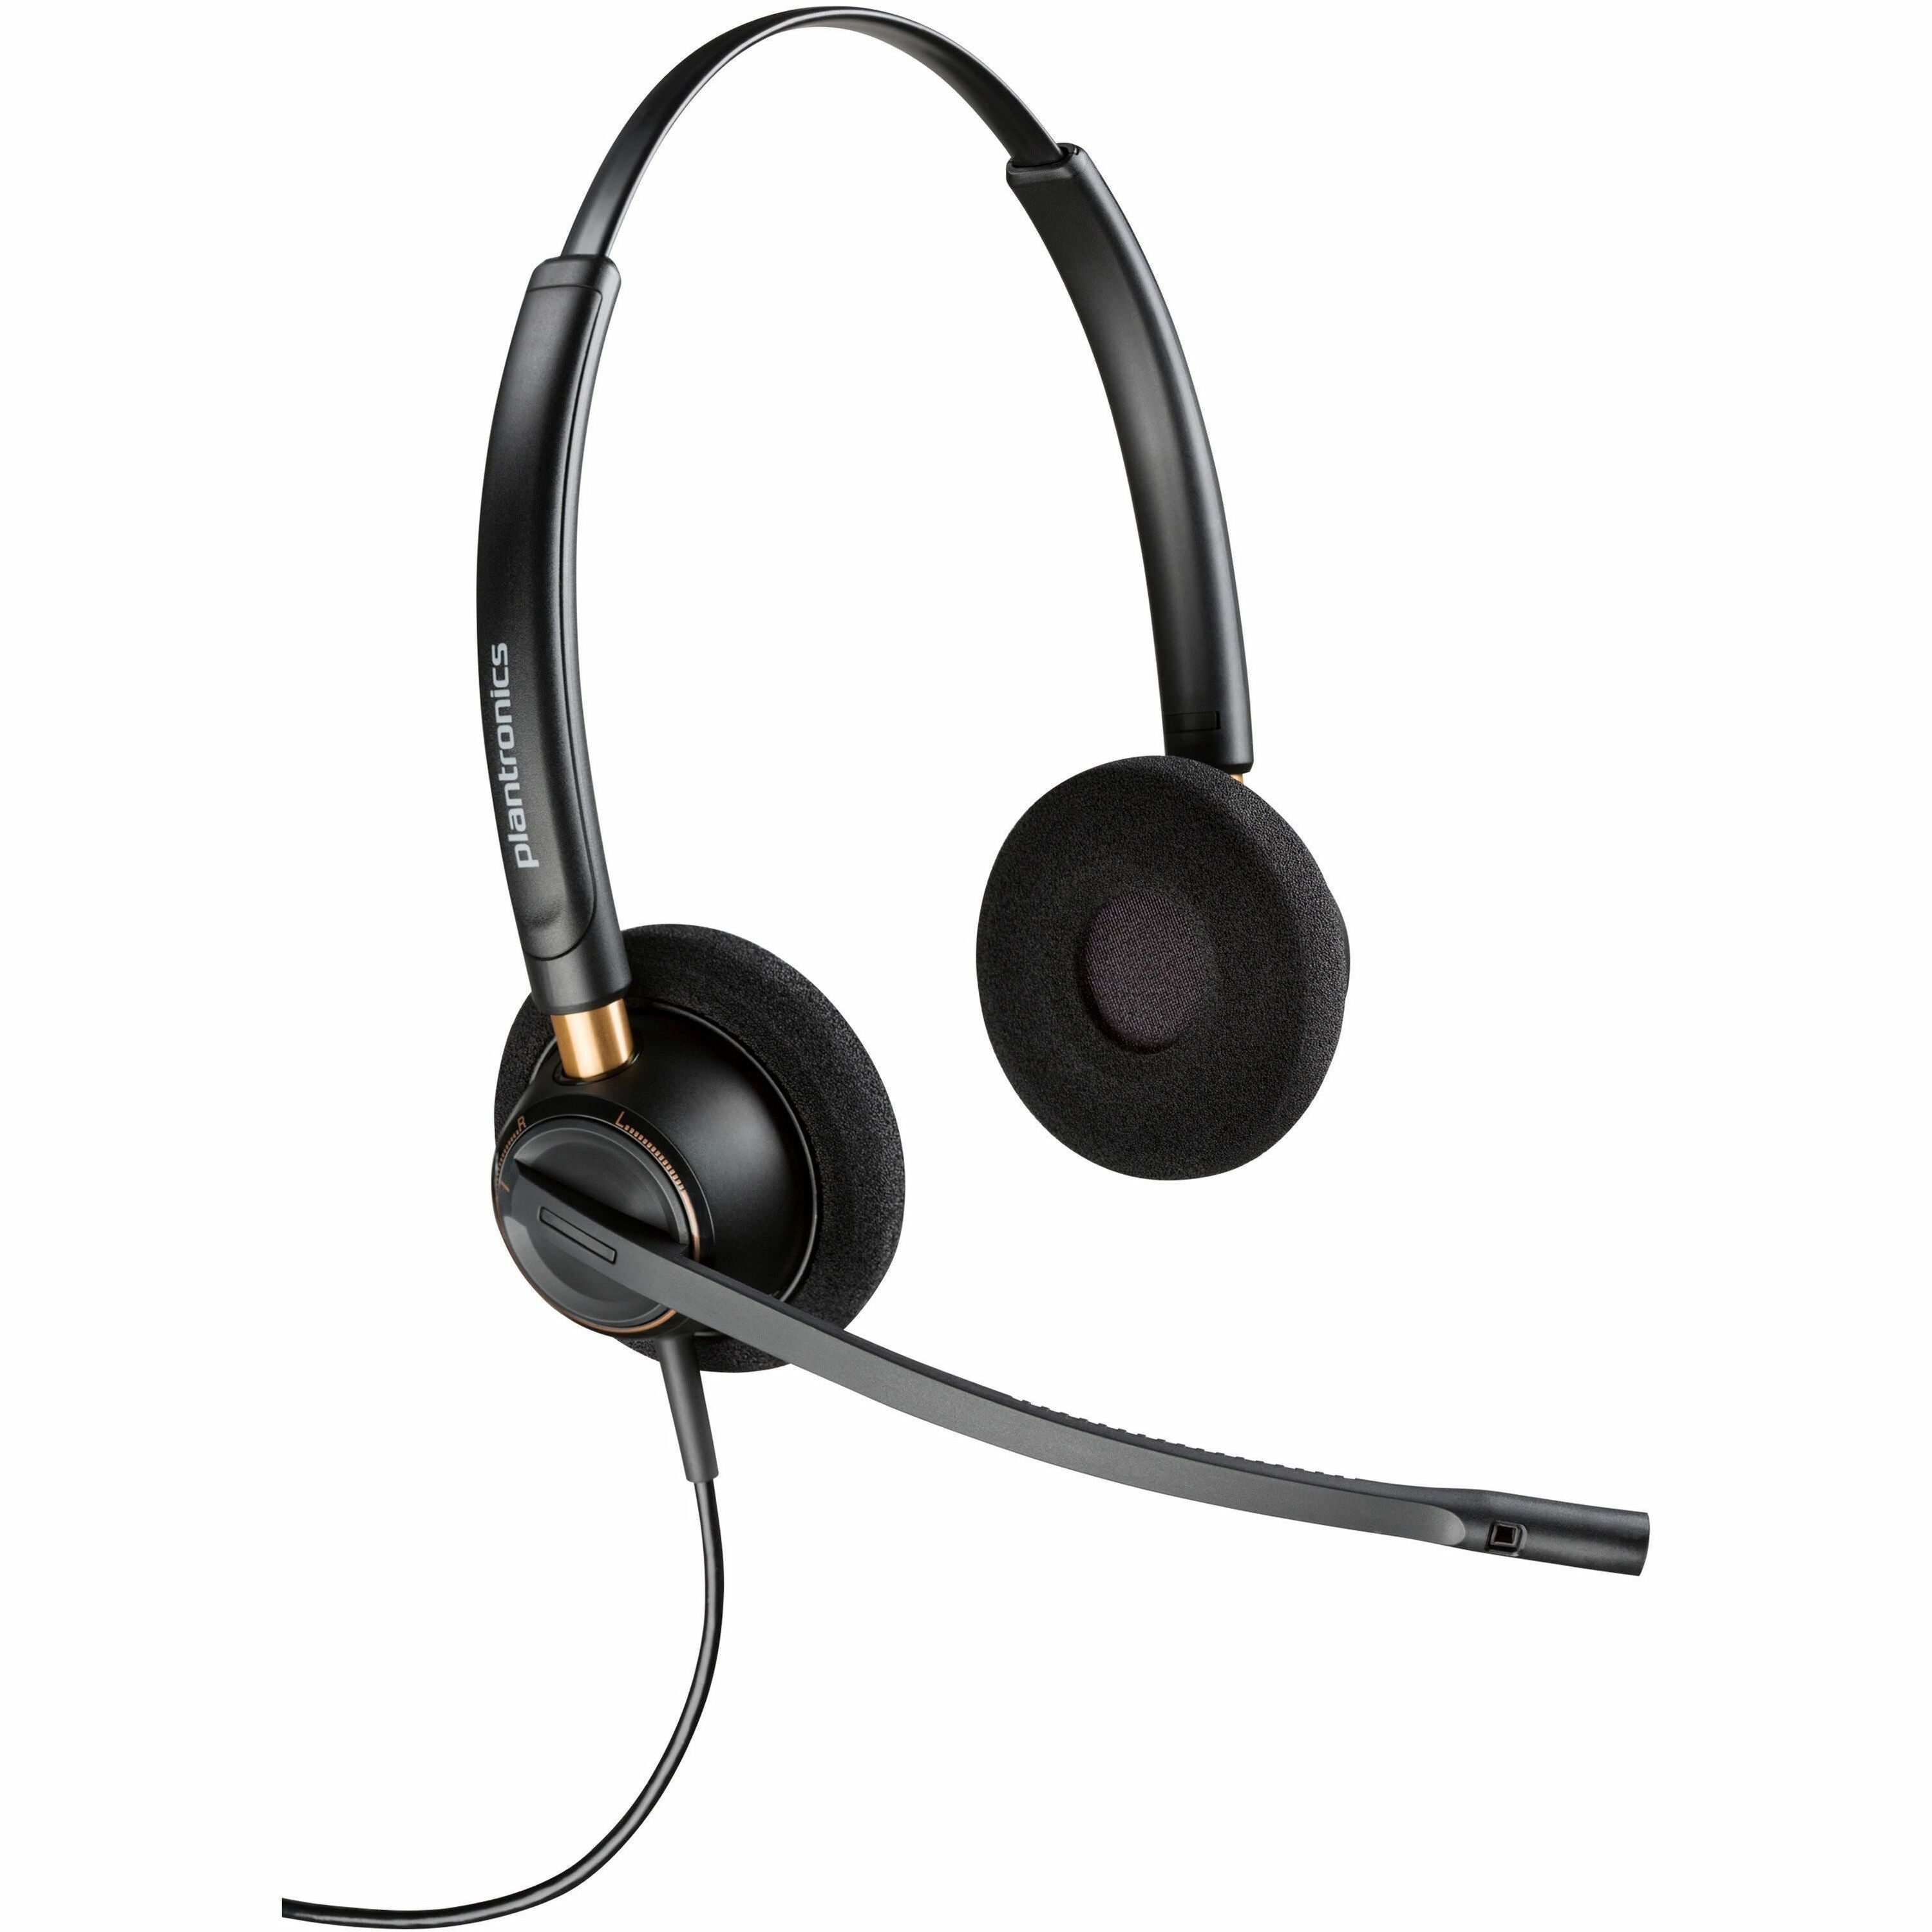 poly-encorepro-hw520-binaural-headset-stereo-mini-phone-35mm-wired-20-hz-16-khz-on-ear-binaural-ear-cup-258-ft-cable-omni-directional-noise-cancelling-microphone-black_hew783p6aa - 1